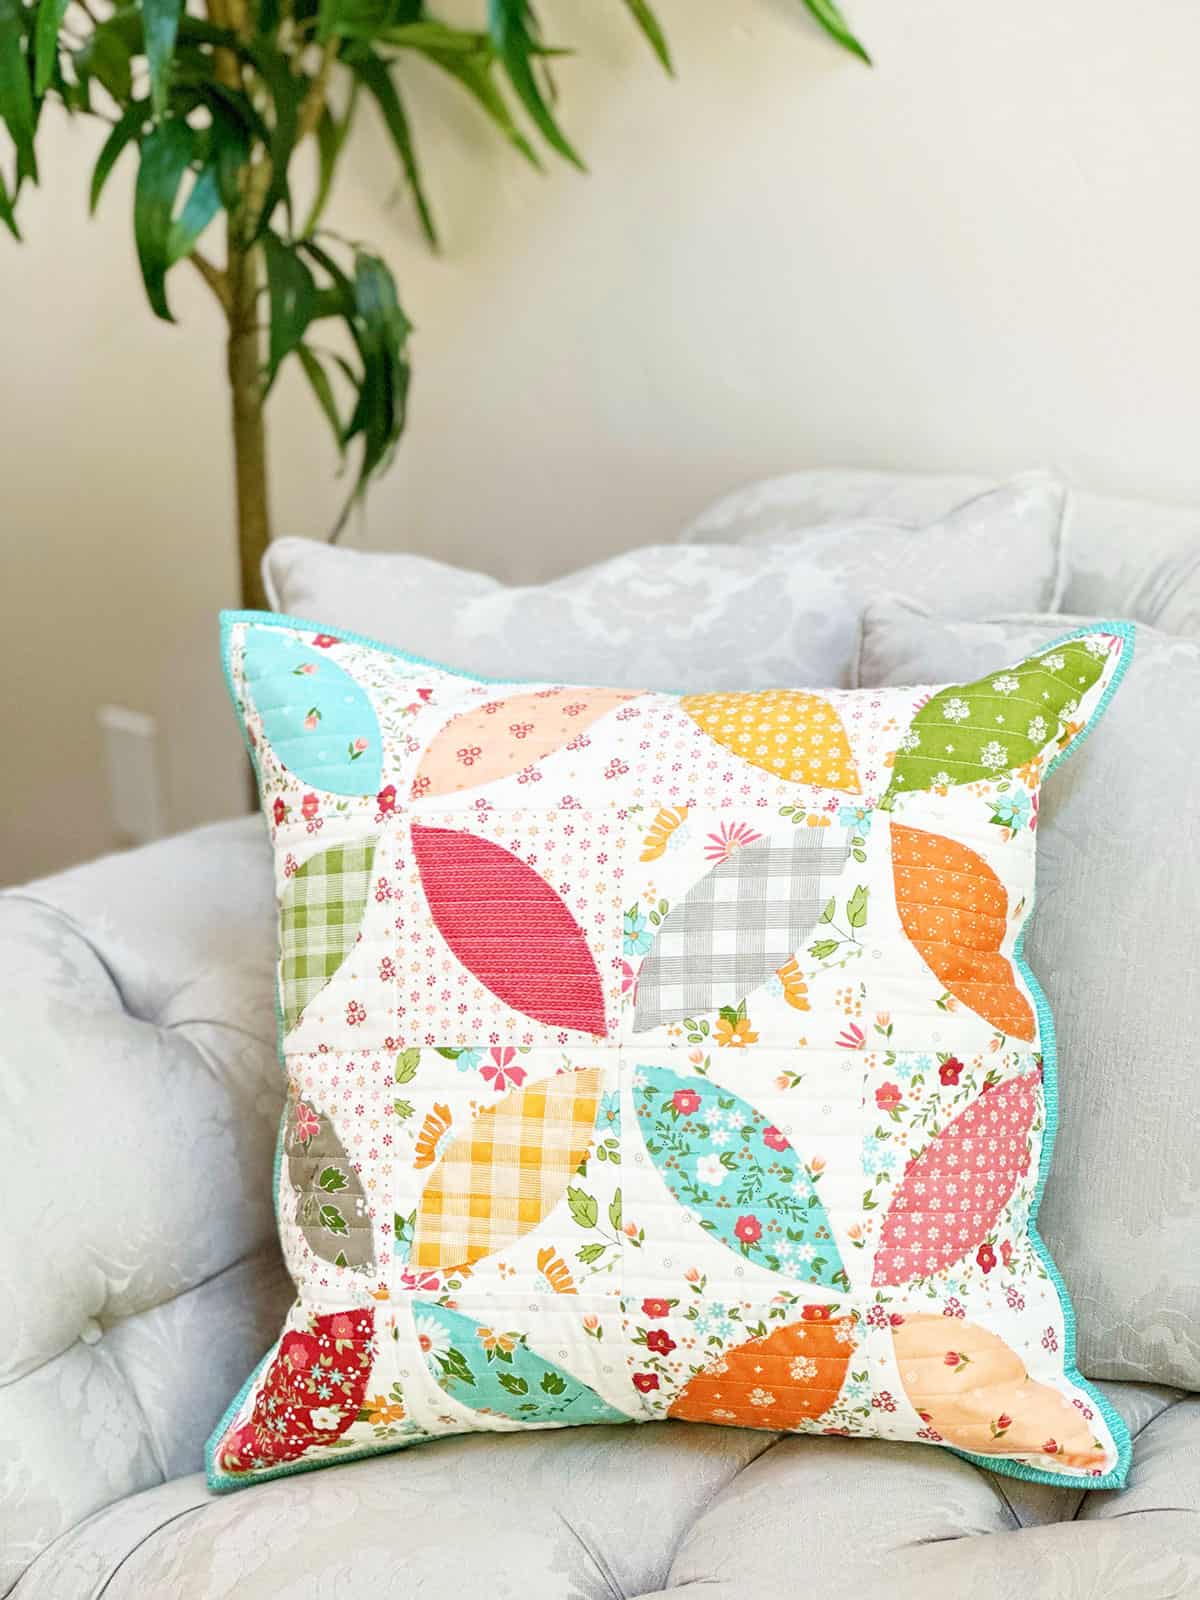 Best Quilt Ideas - Precut Friendly featured by Top US Quilt Blog, A Quilting Life